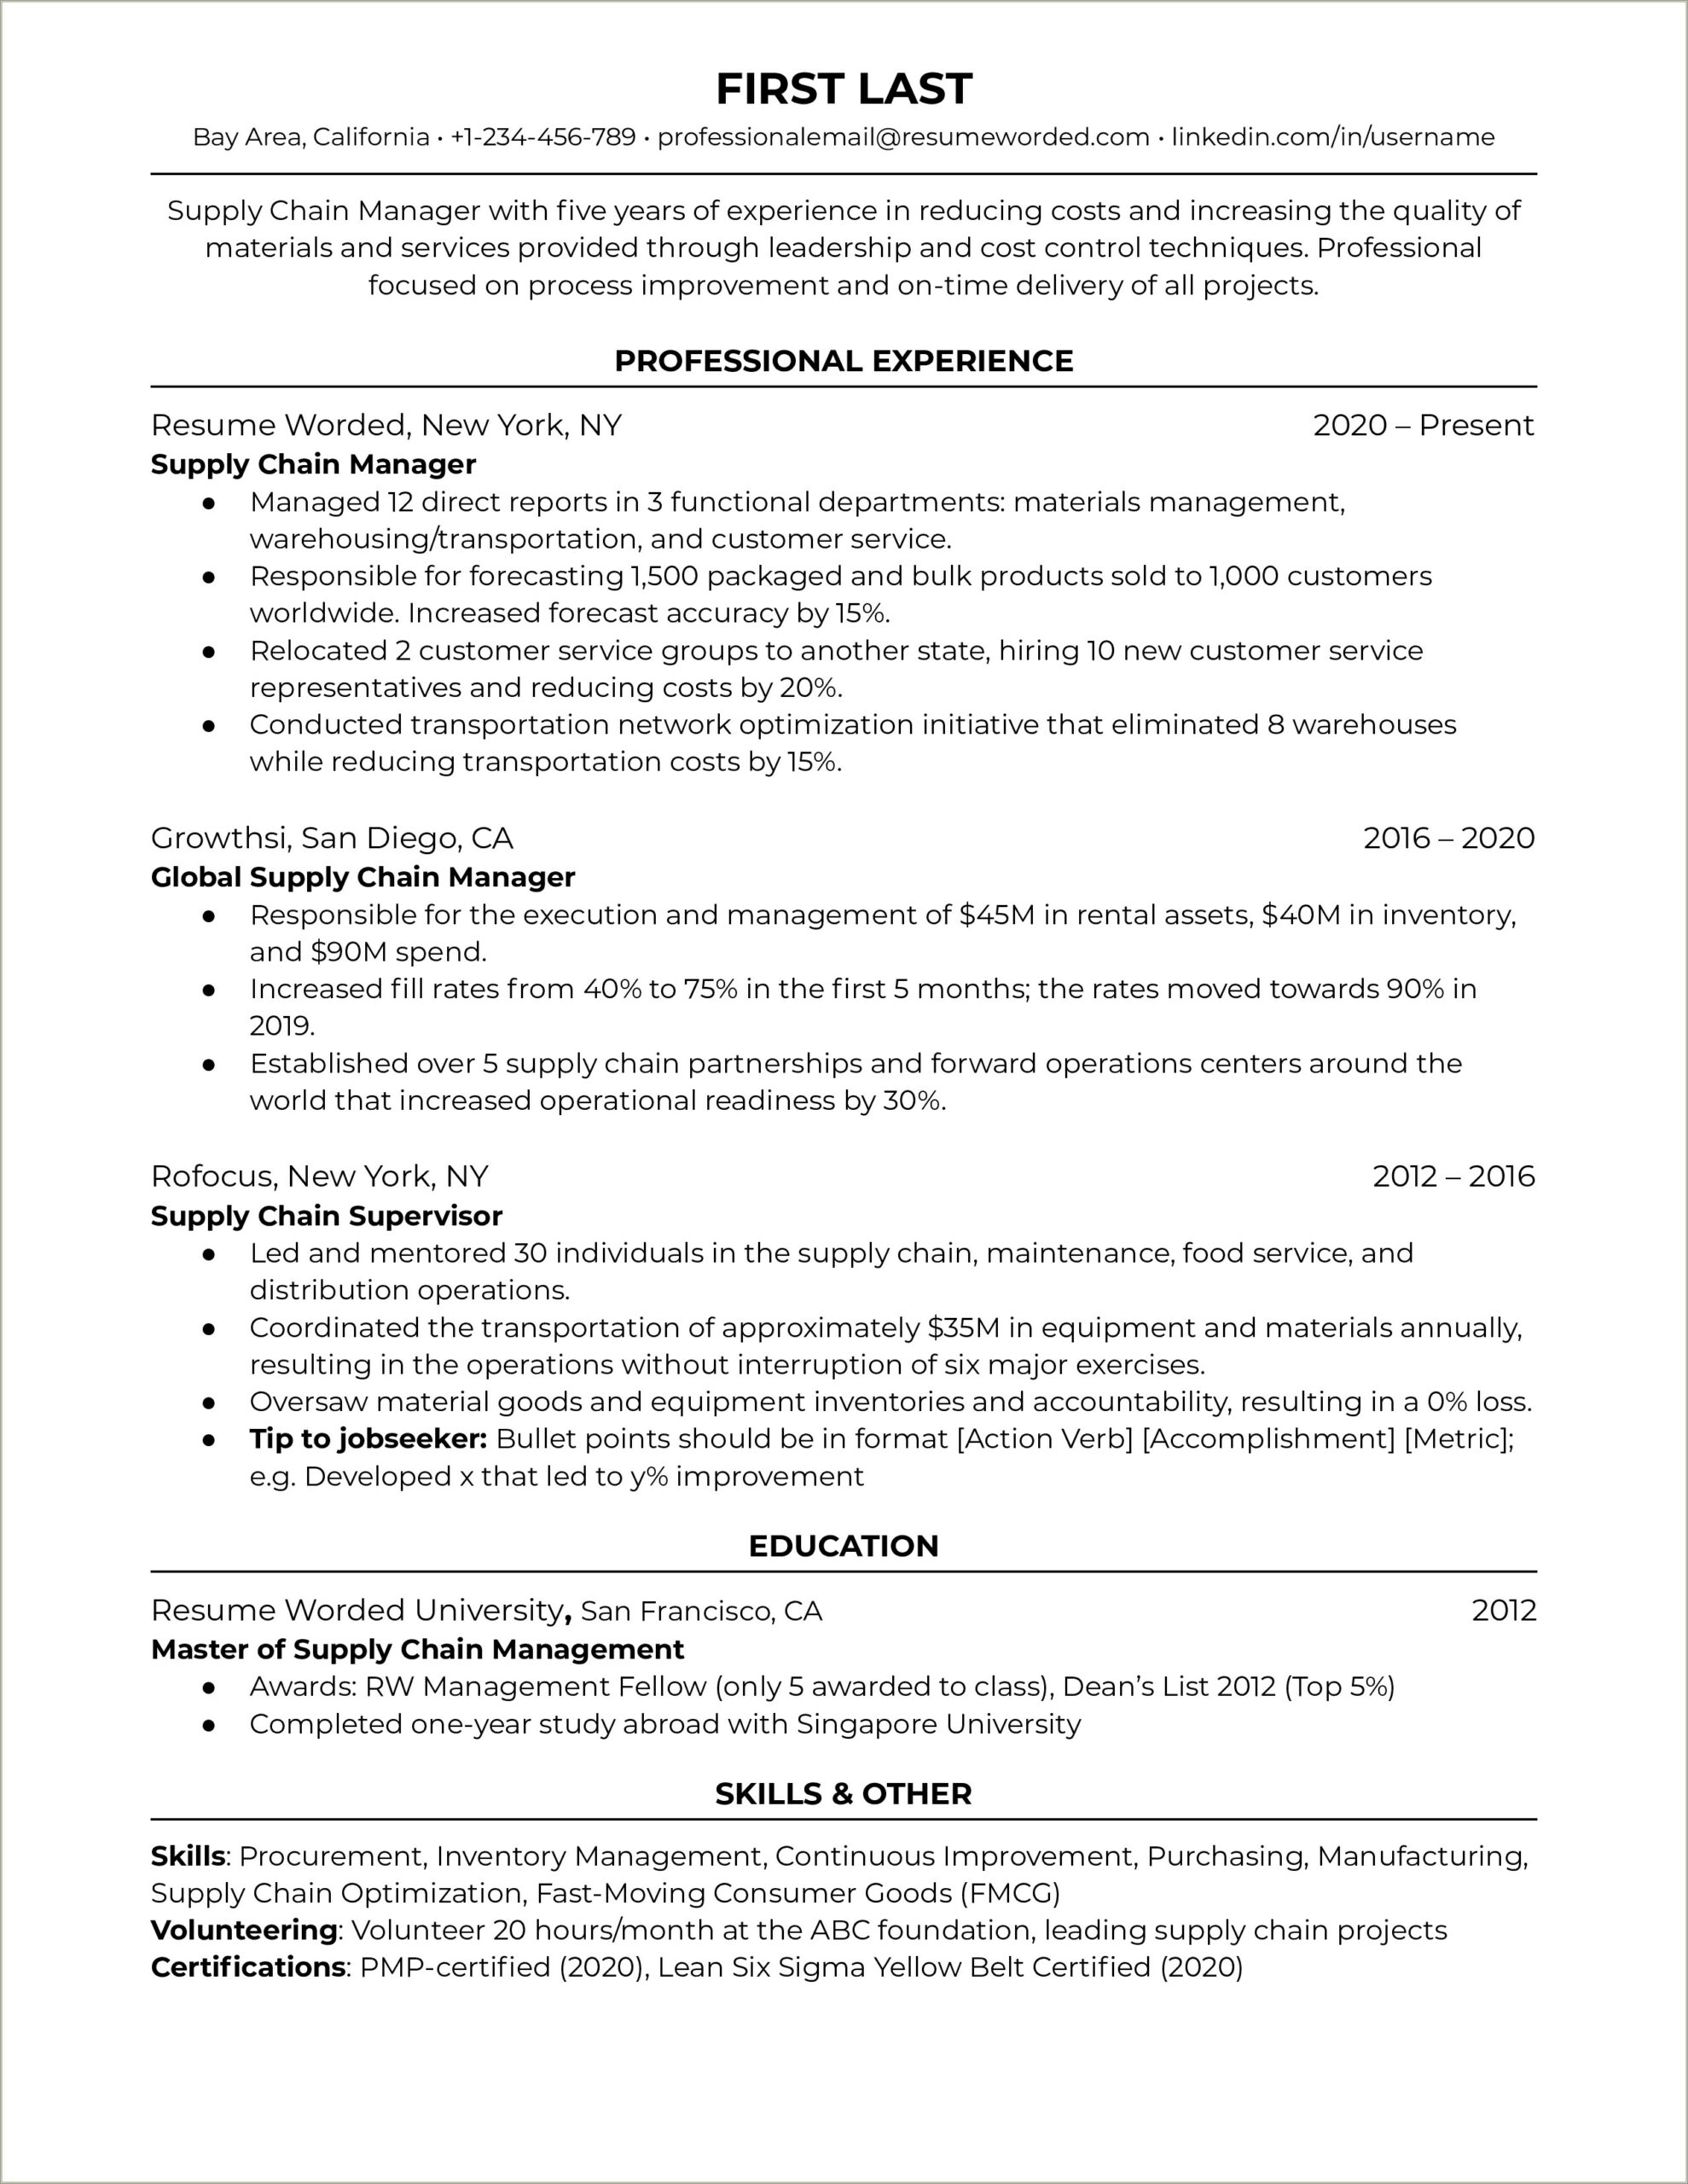 Resume Format For Logistics Manager In India